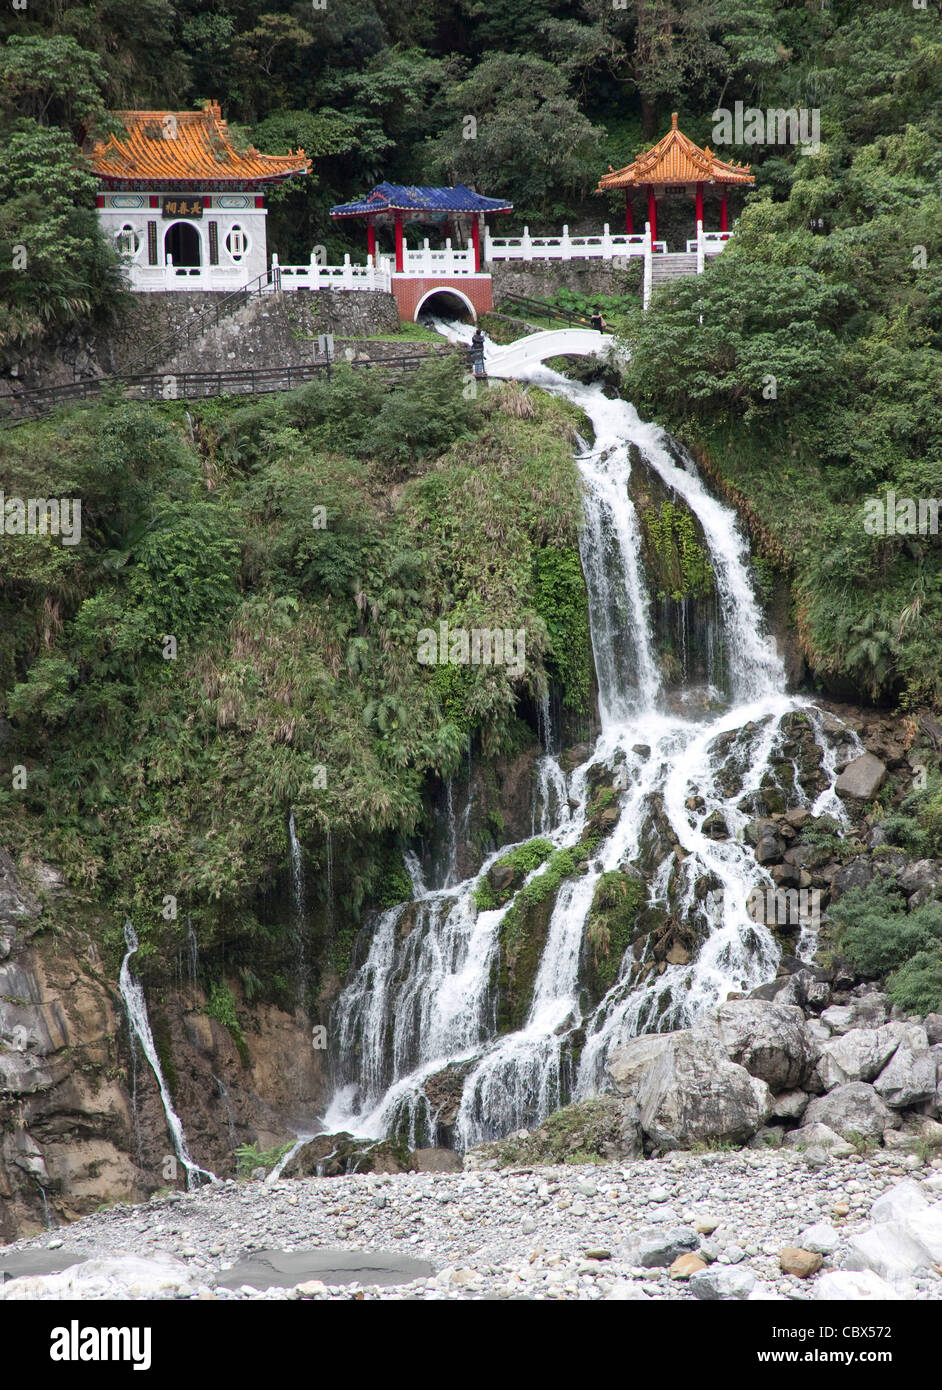 View of a temple and water falls at the Tarako Gorge at Hualien Taiwan Stock Photo